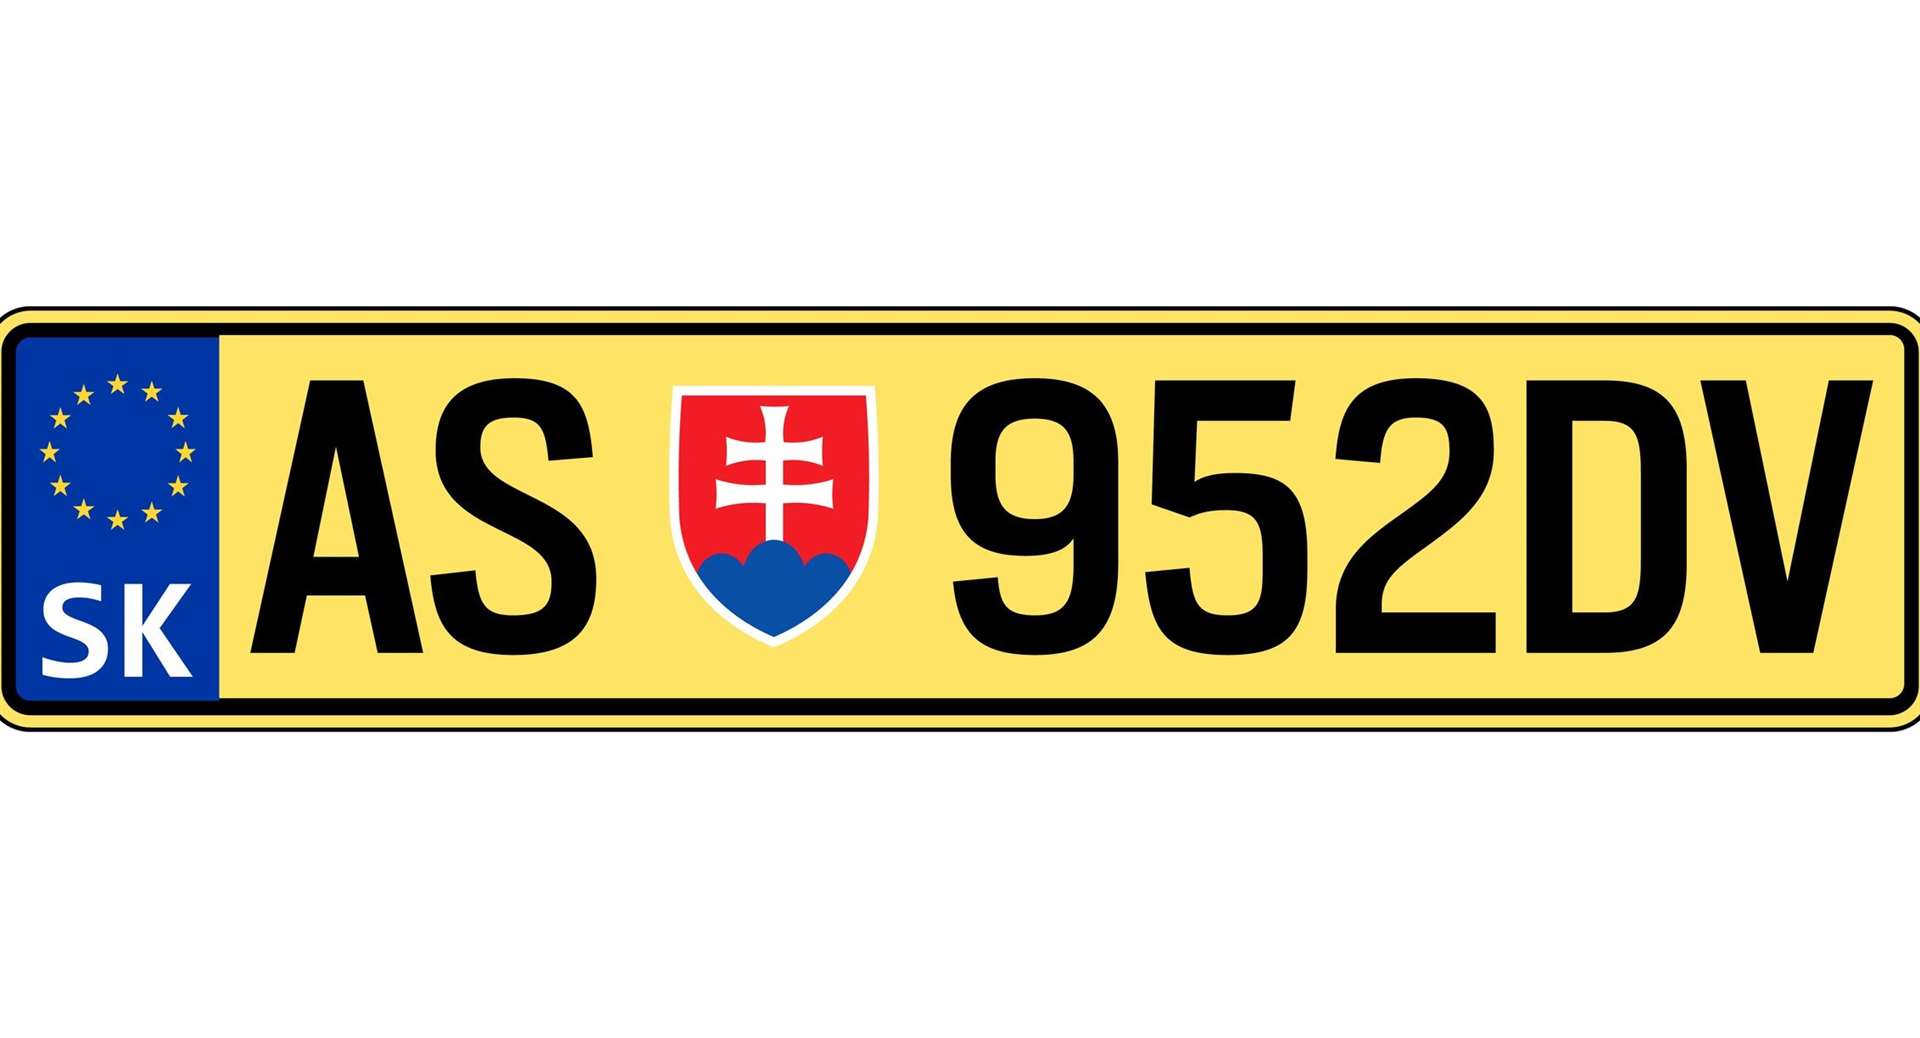 It's hard to trace the owners of foreign-registered plates - like this one from Slovakia